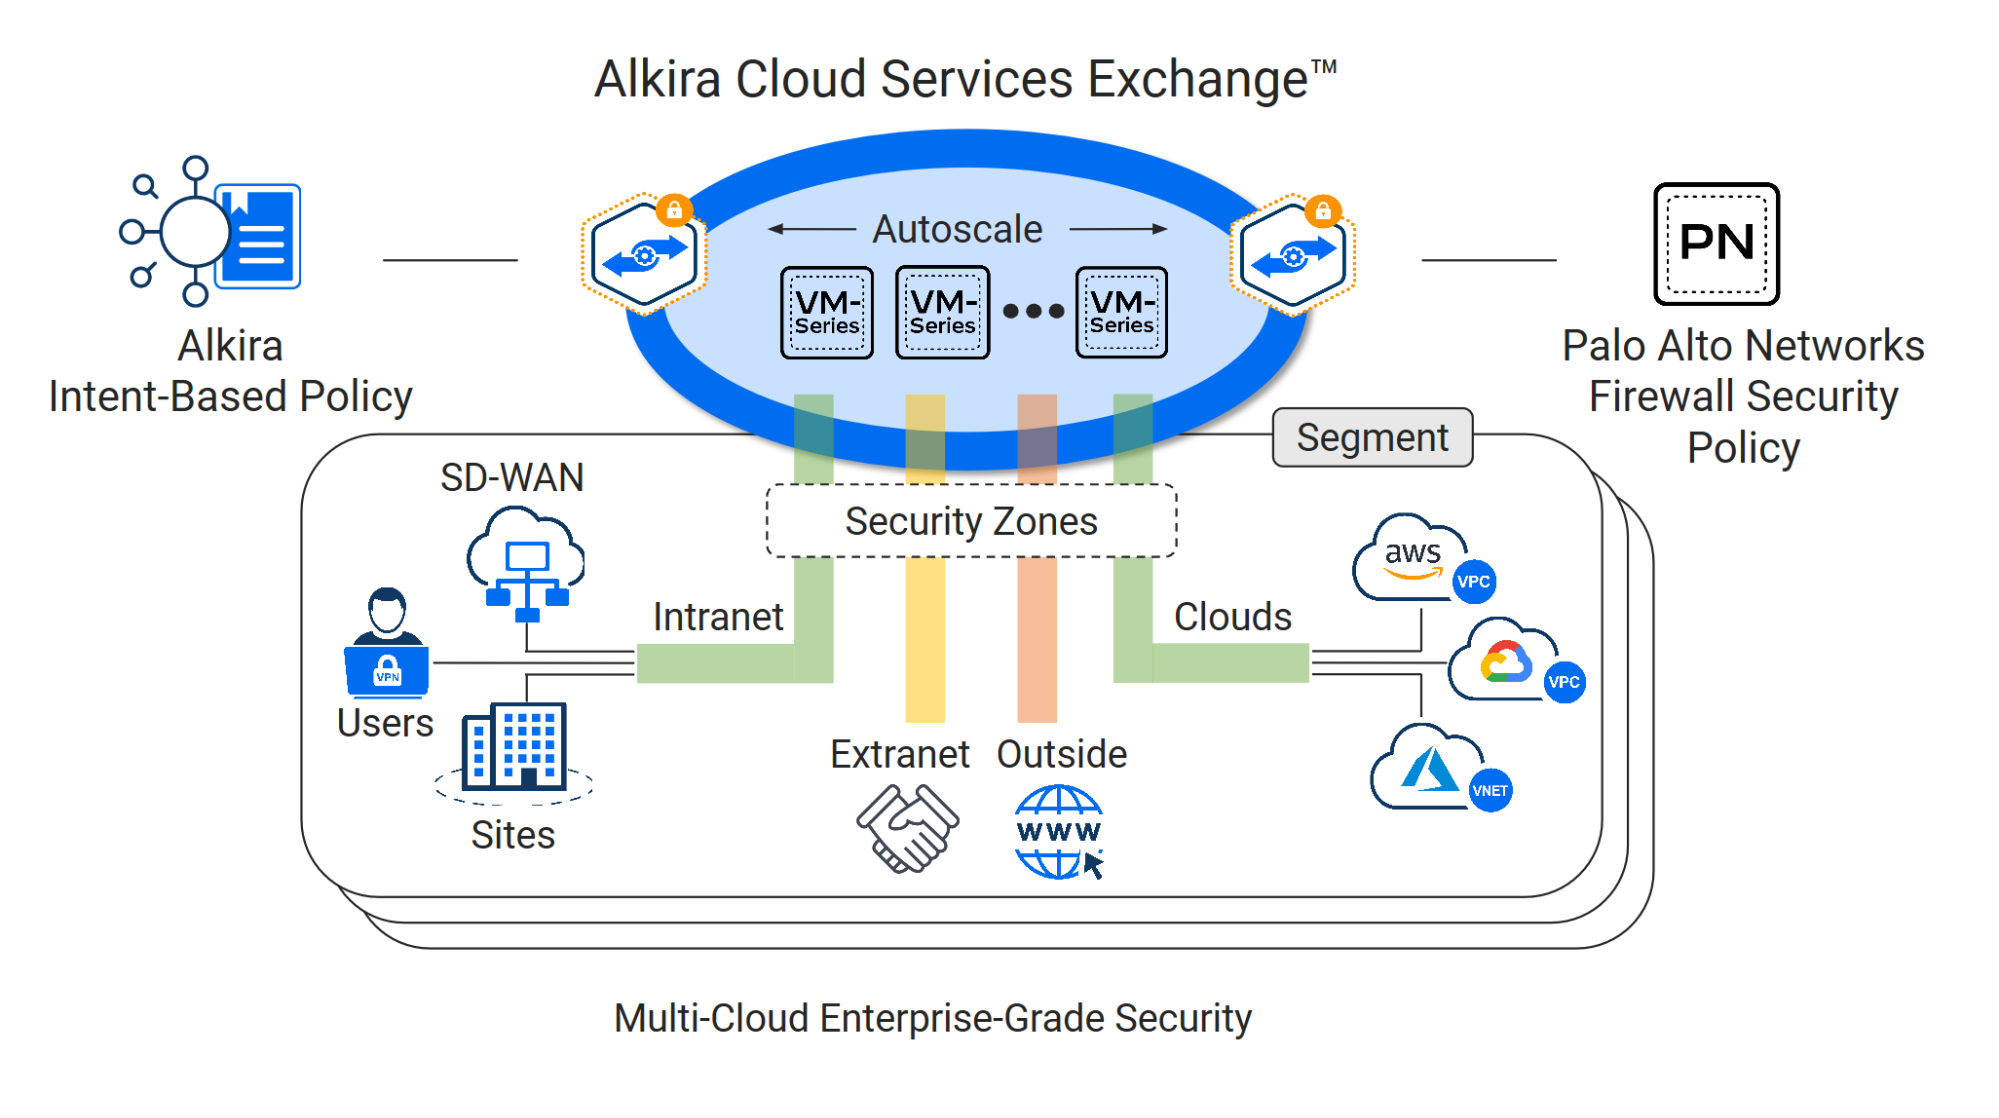 This image shows how to achieve multi-cloud enterprise-grade security through Alkira Intent-Based Policy combined with Palo Alto Networks Firewall Security Policy. 